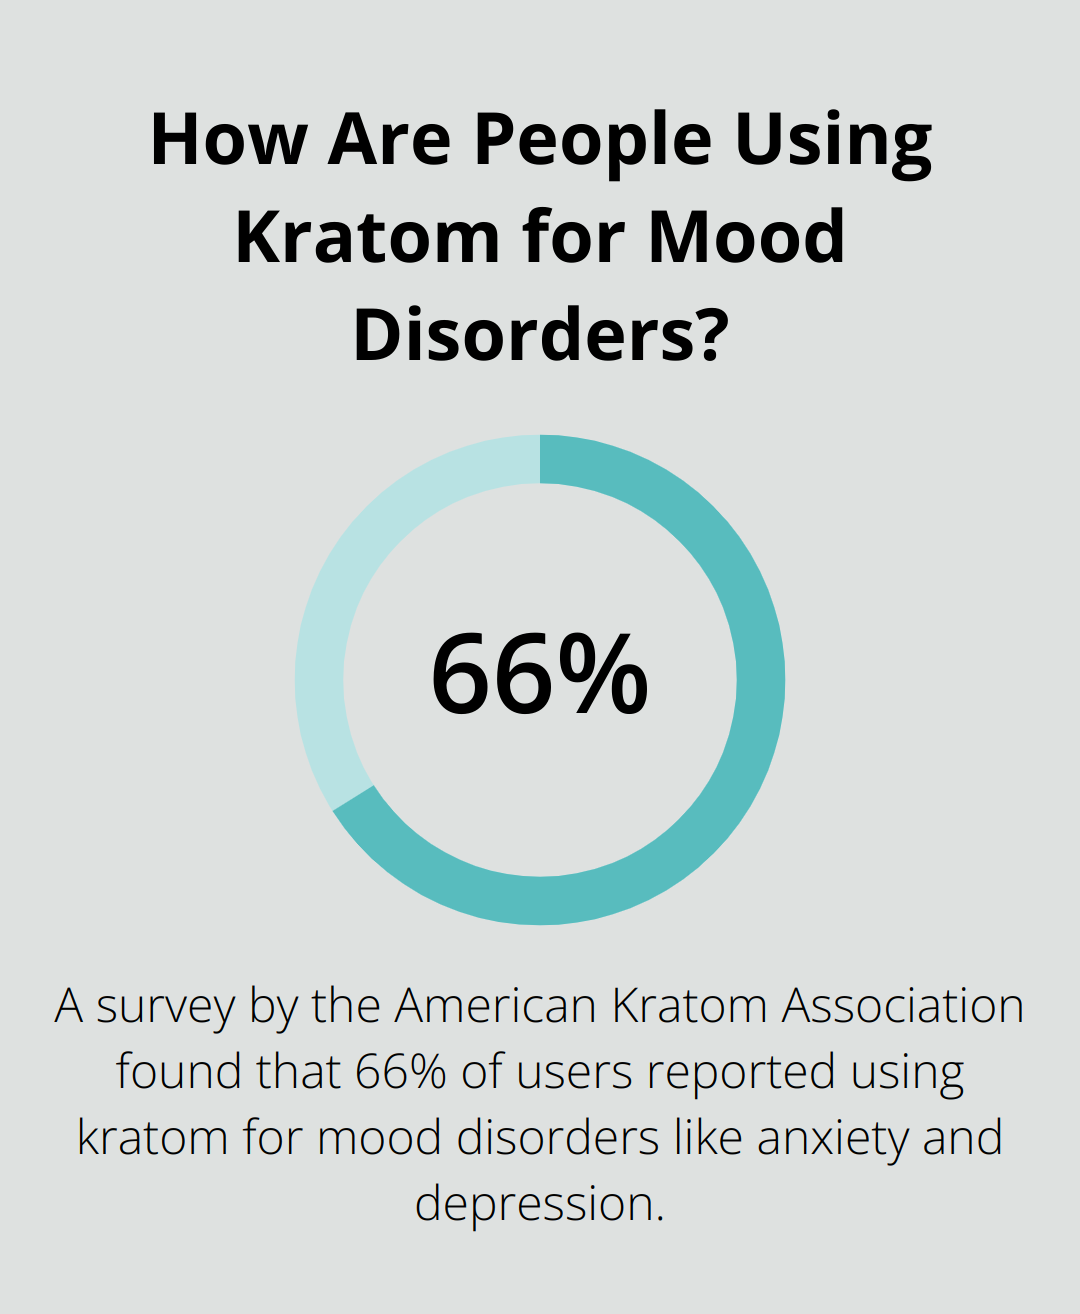 How Are People Using Kratom for Mood Disorders?